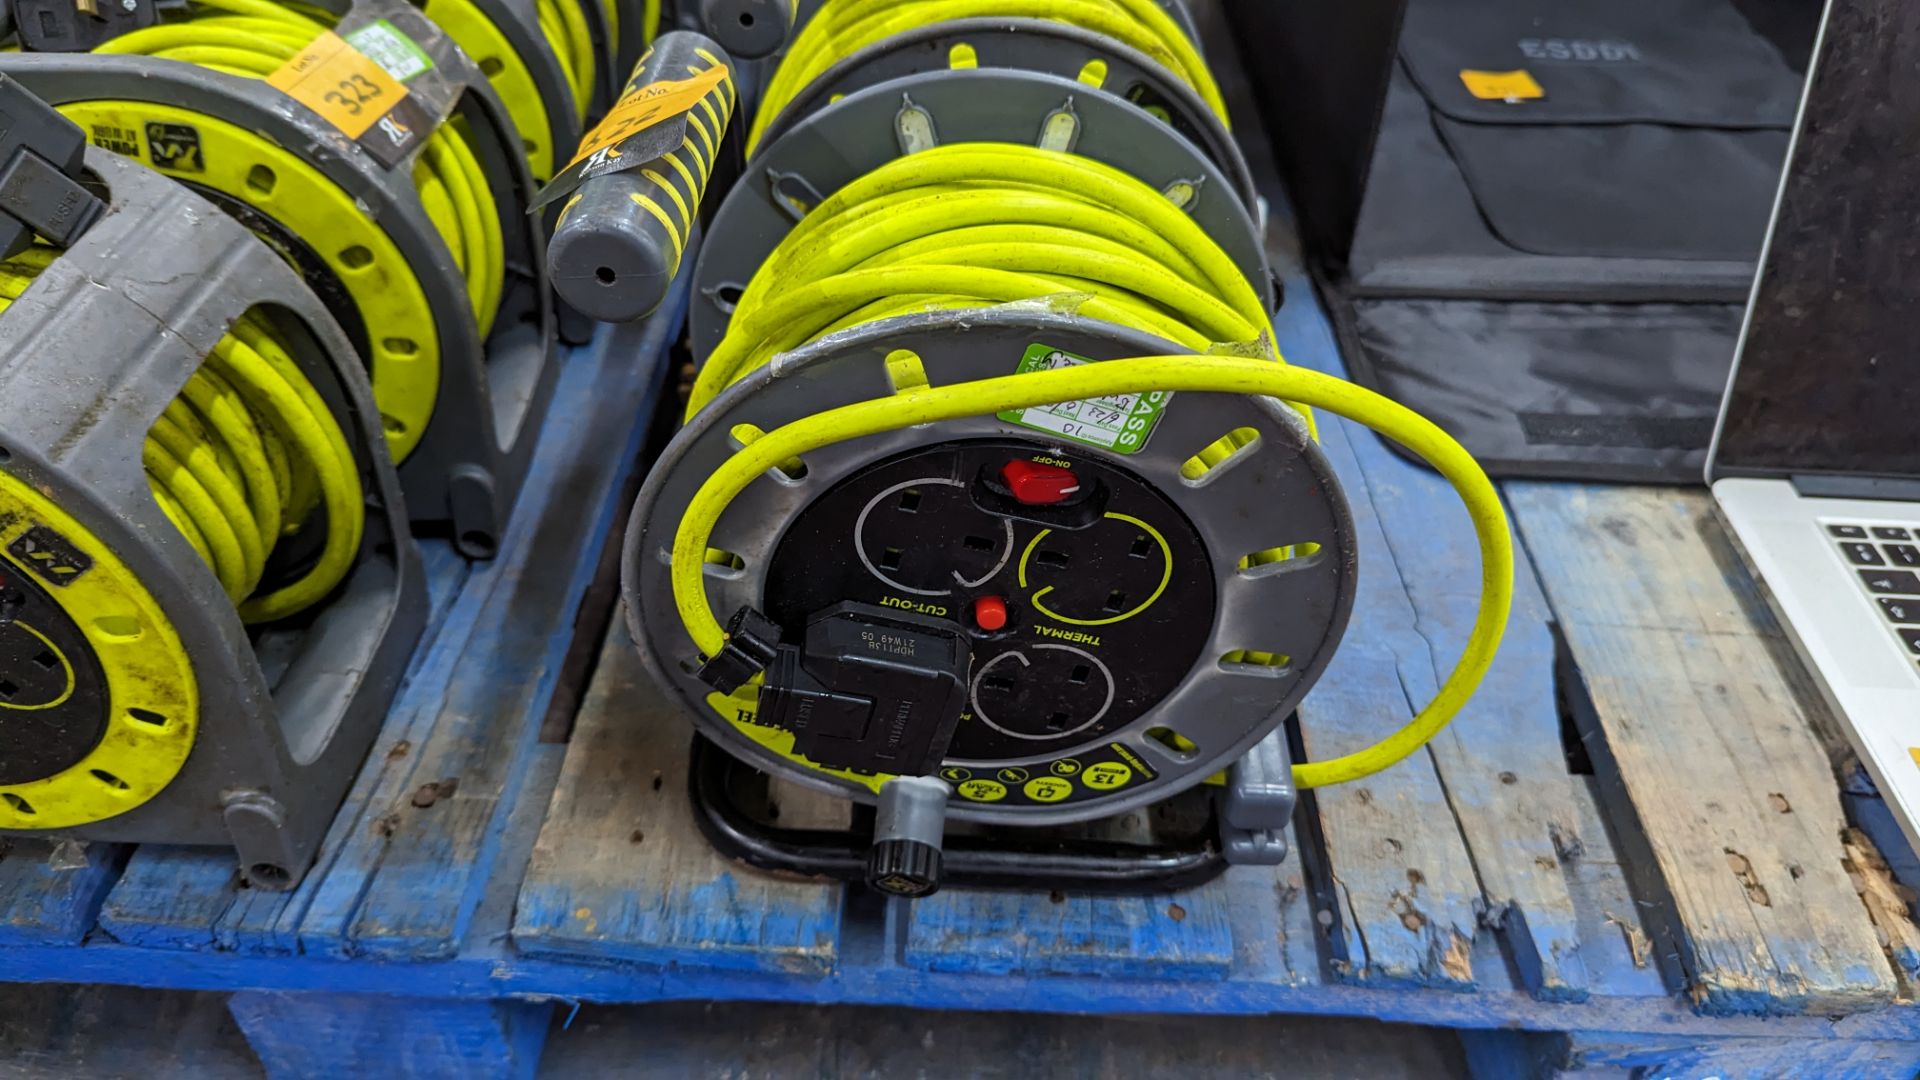 5 off 4 socket 25m cable reels - Image 3 of 7